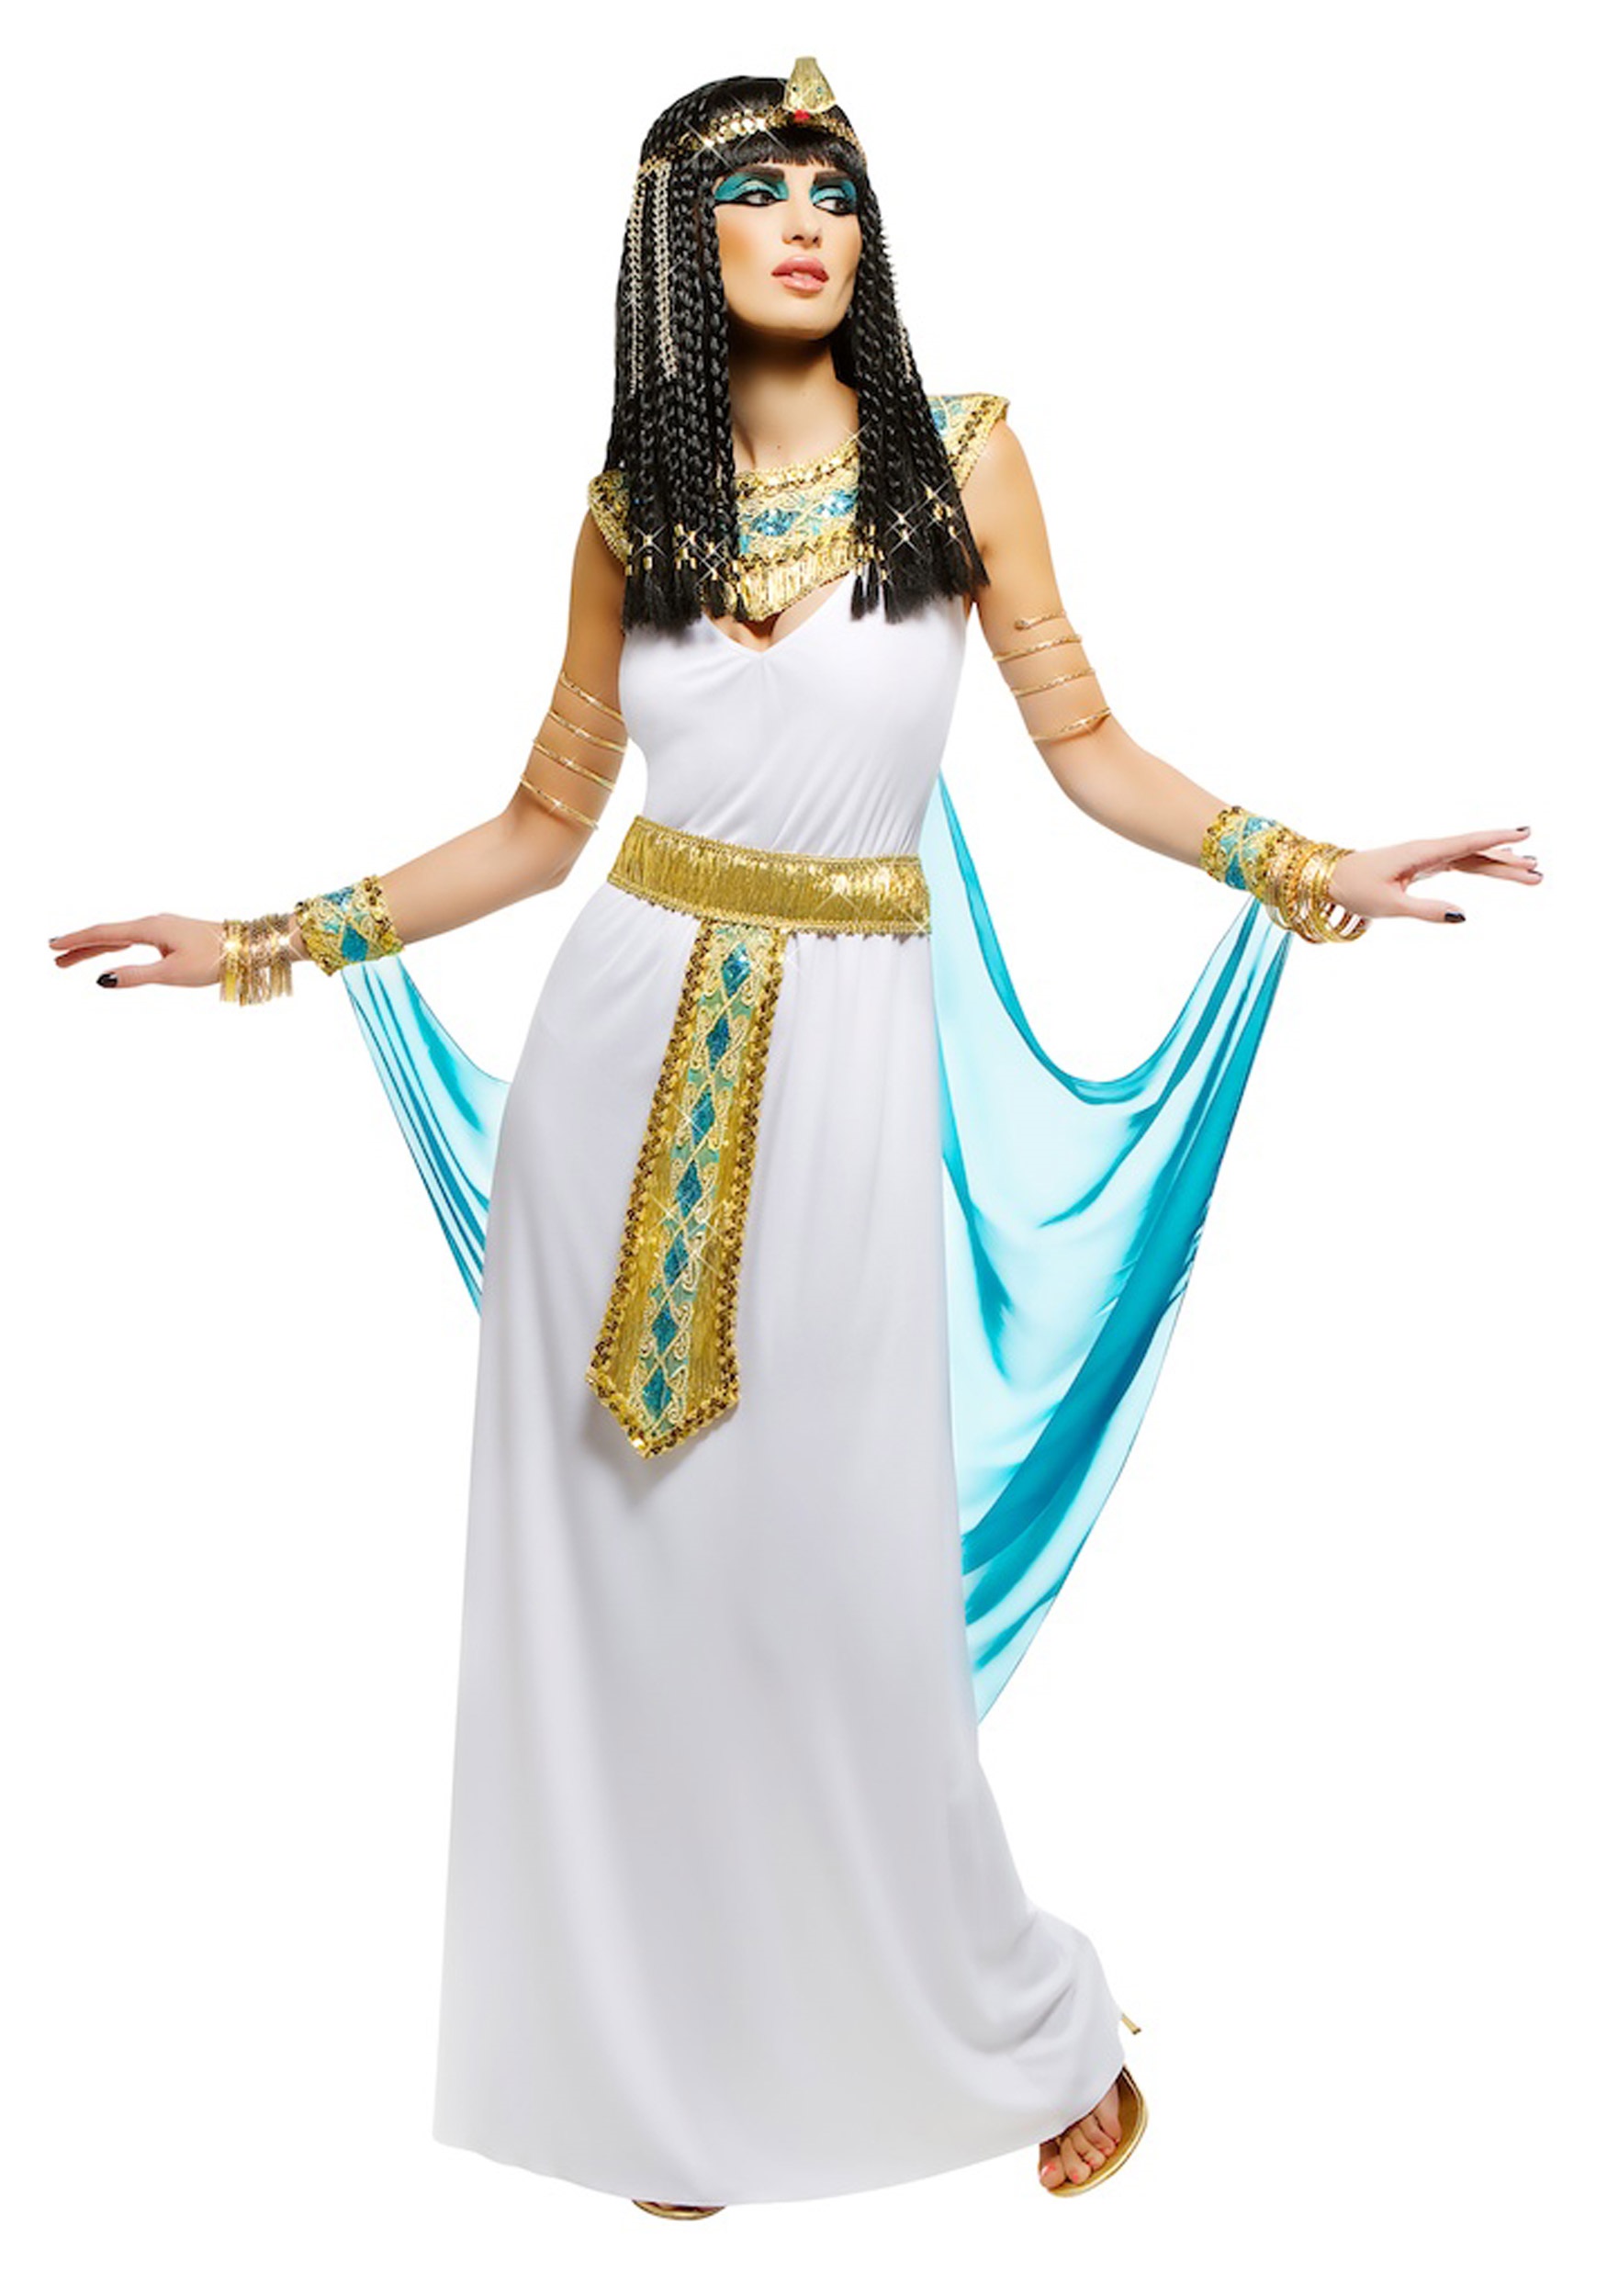 Drastic mouse Melt Queen Cleopatra Adult Costume - Halloween Costume Ideas 2022